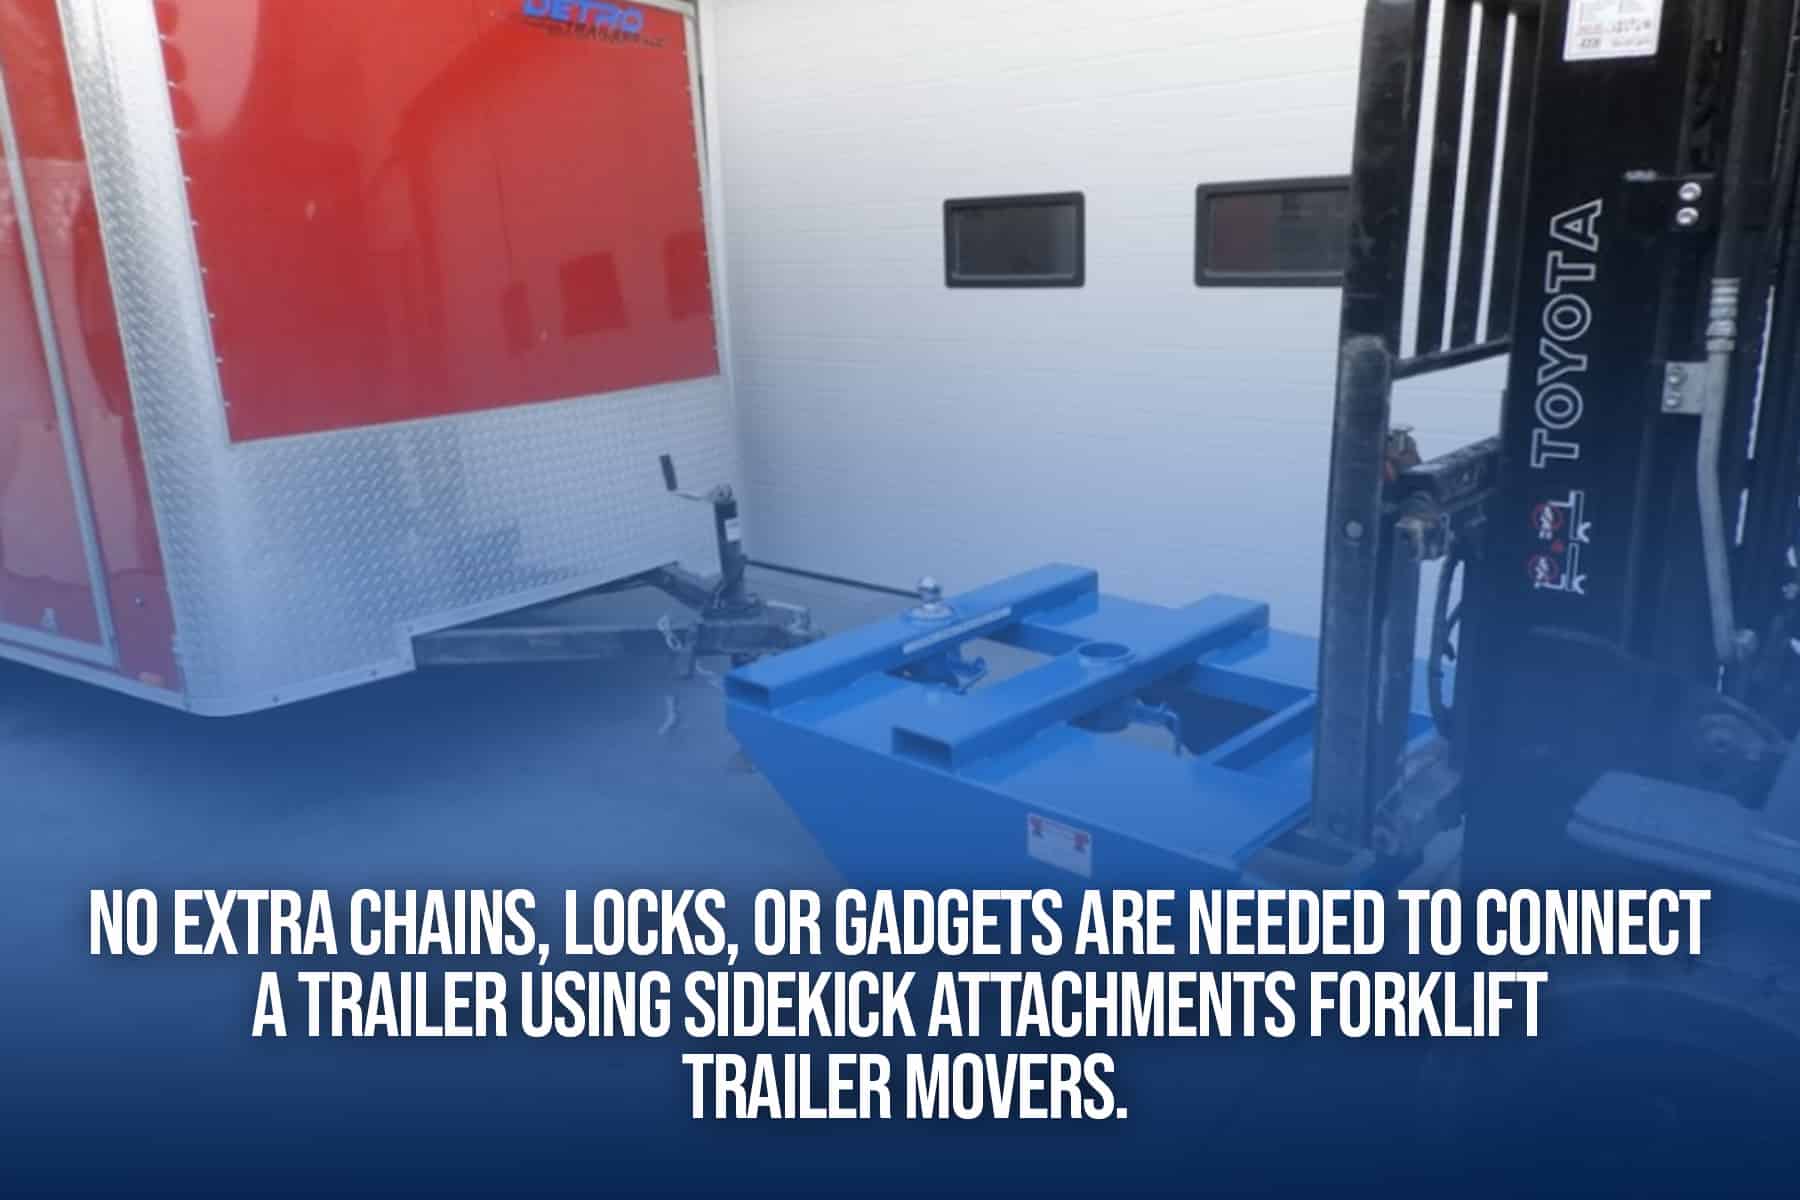 no extra gadgets are used on sidekick attachments forklift trailer movers